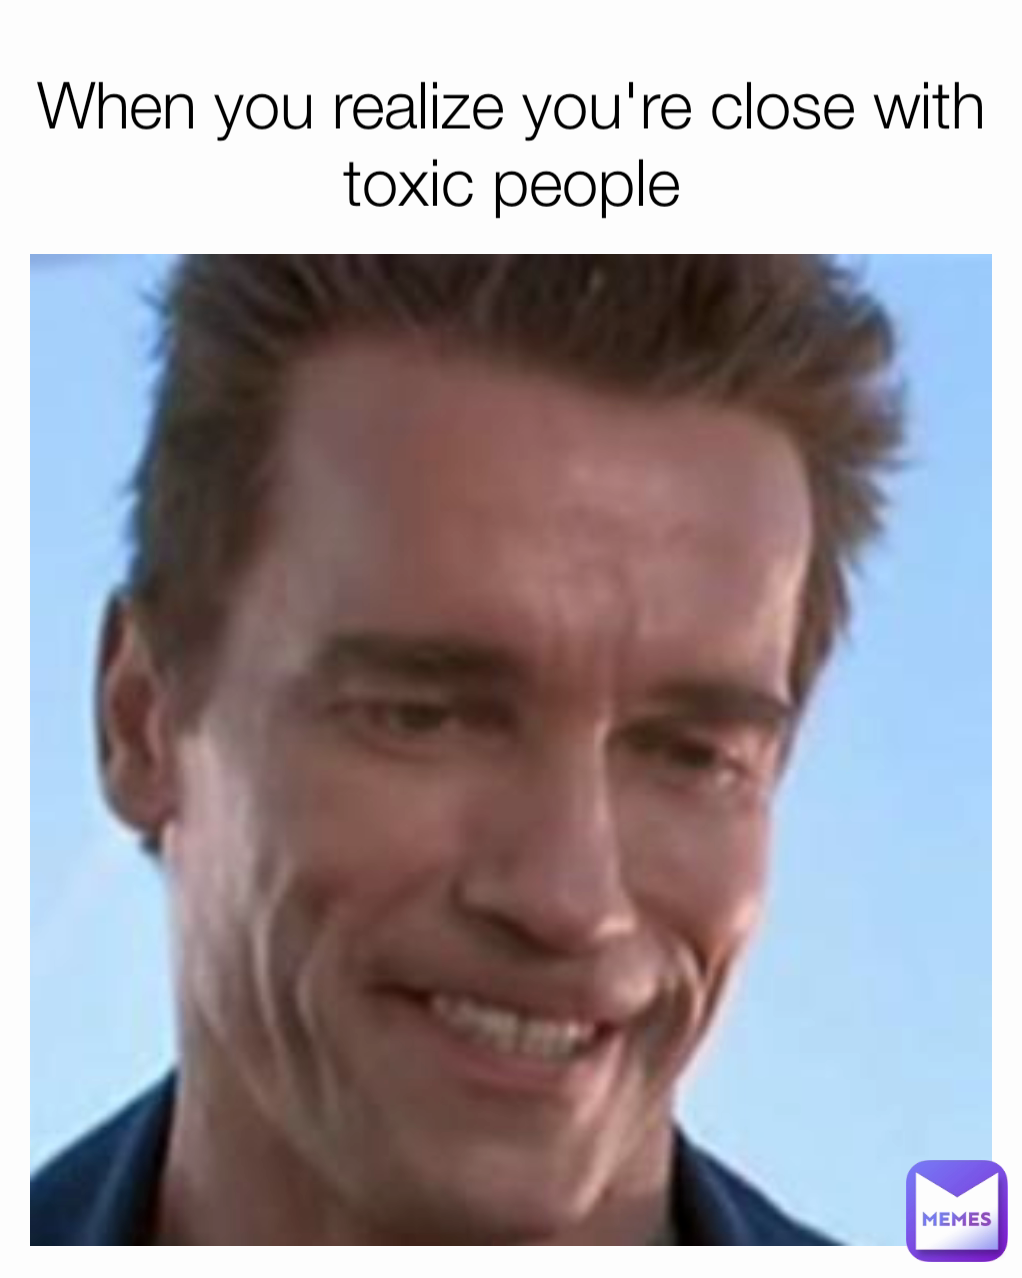 When you realize you're close with toxic people